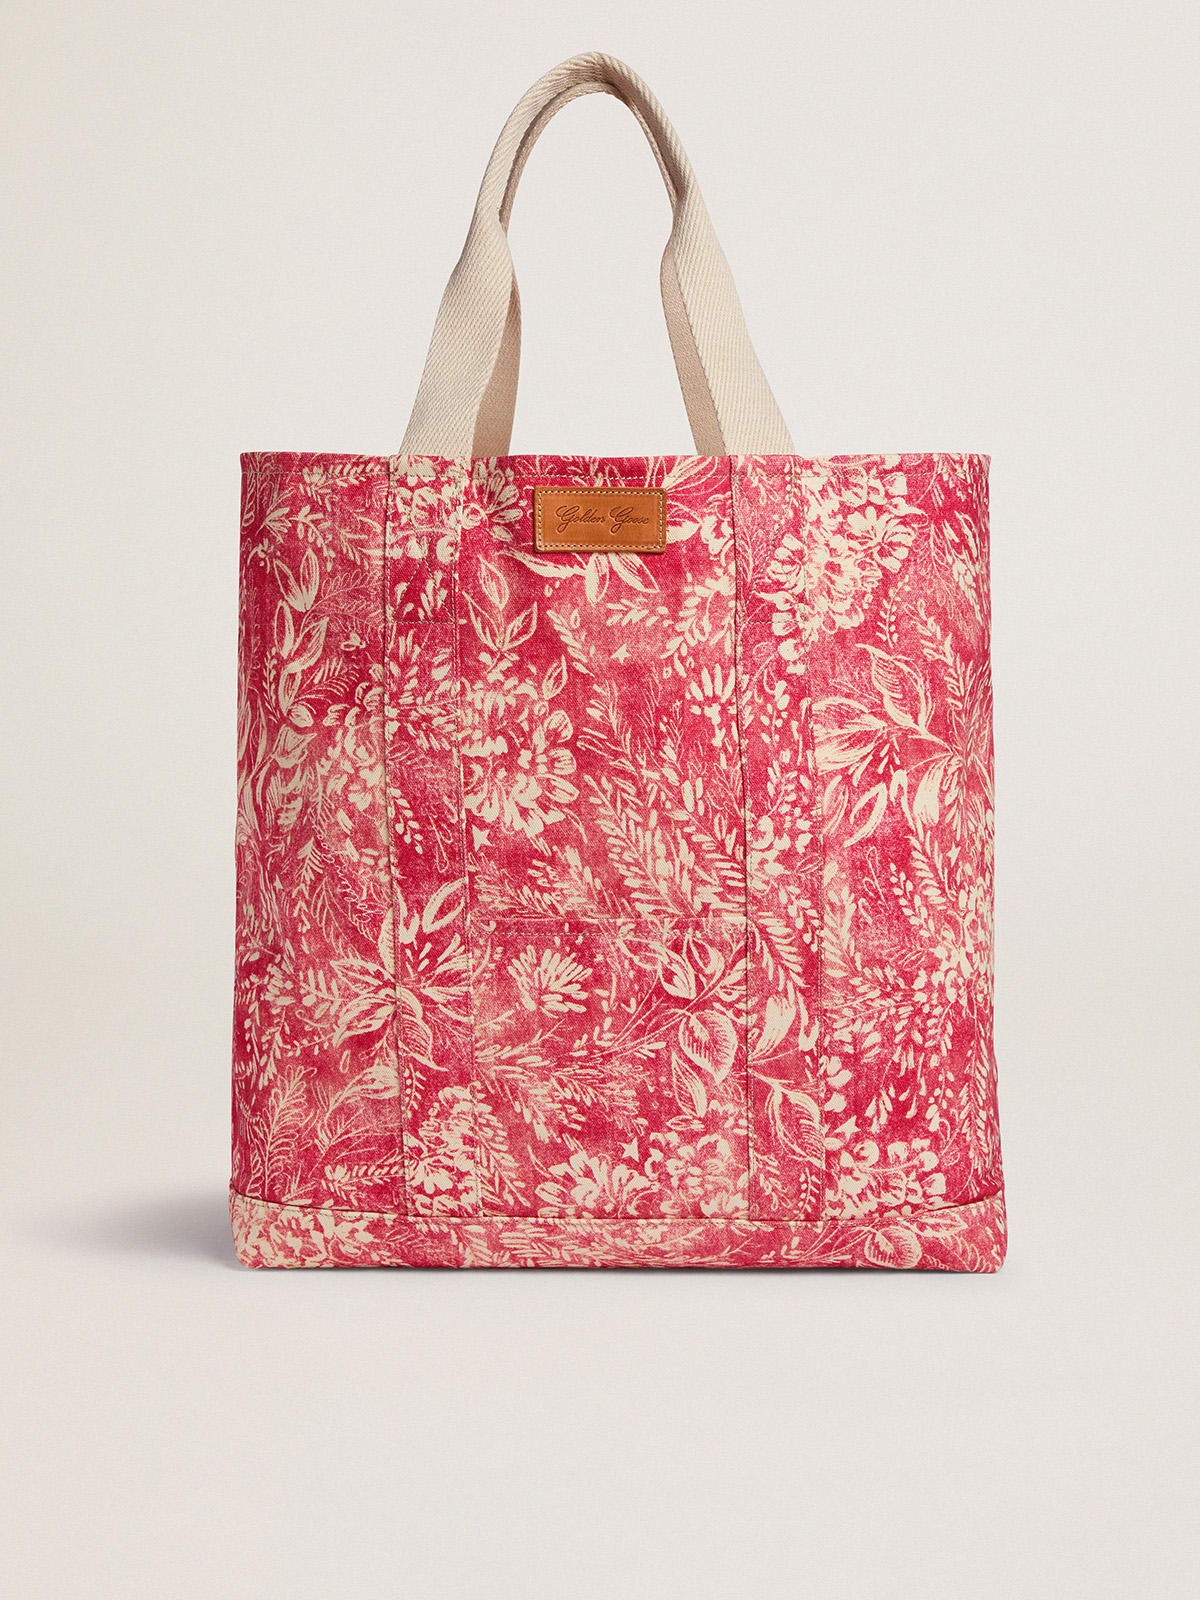 Golden Resort Capsule Collection canvas Ocean bag in vintage red with contrasting white toile de jouy print